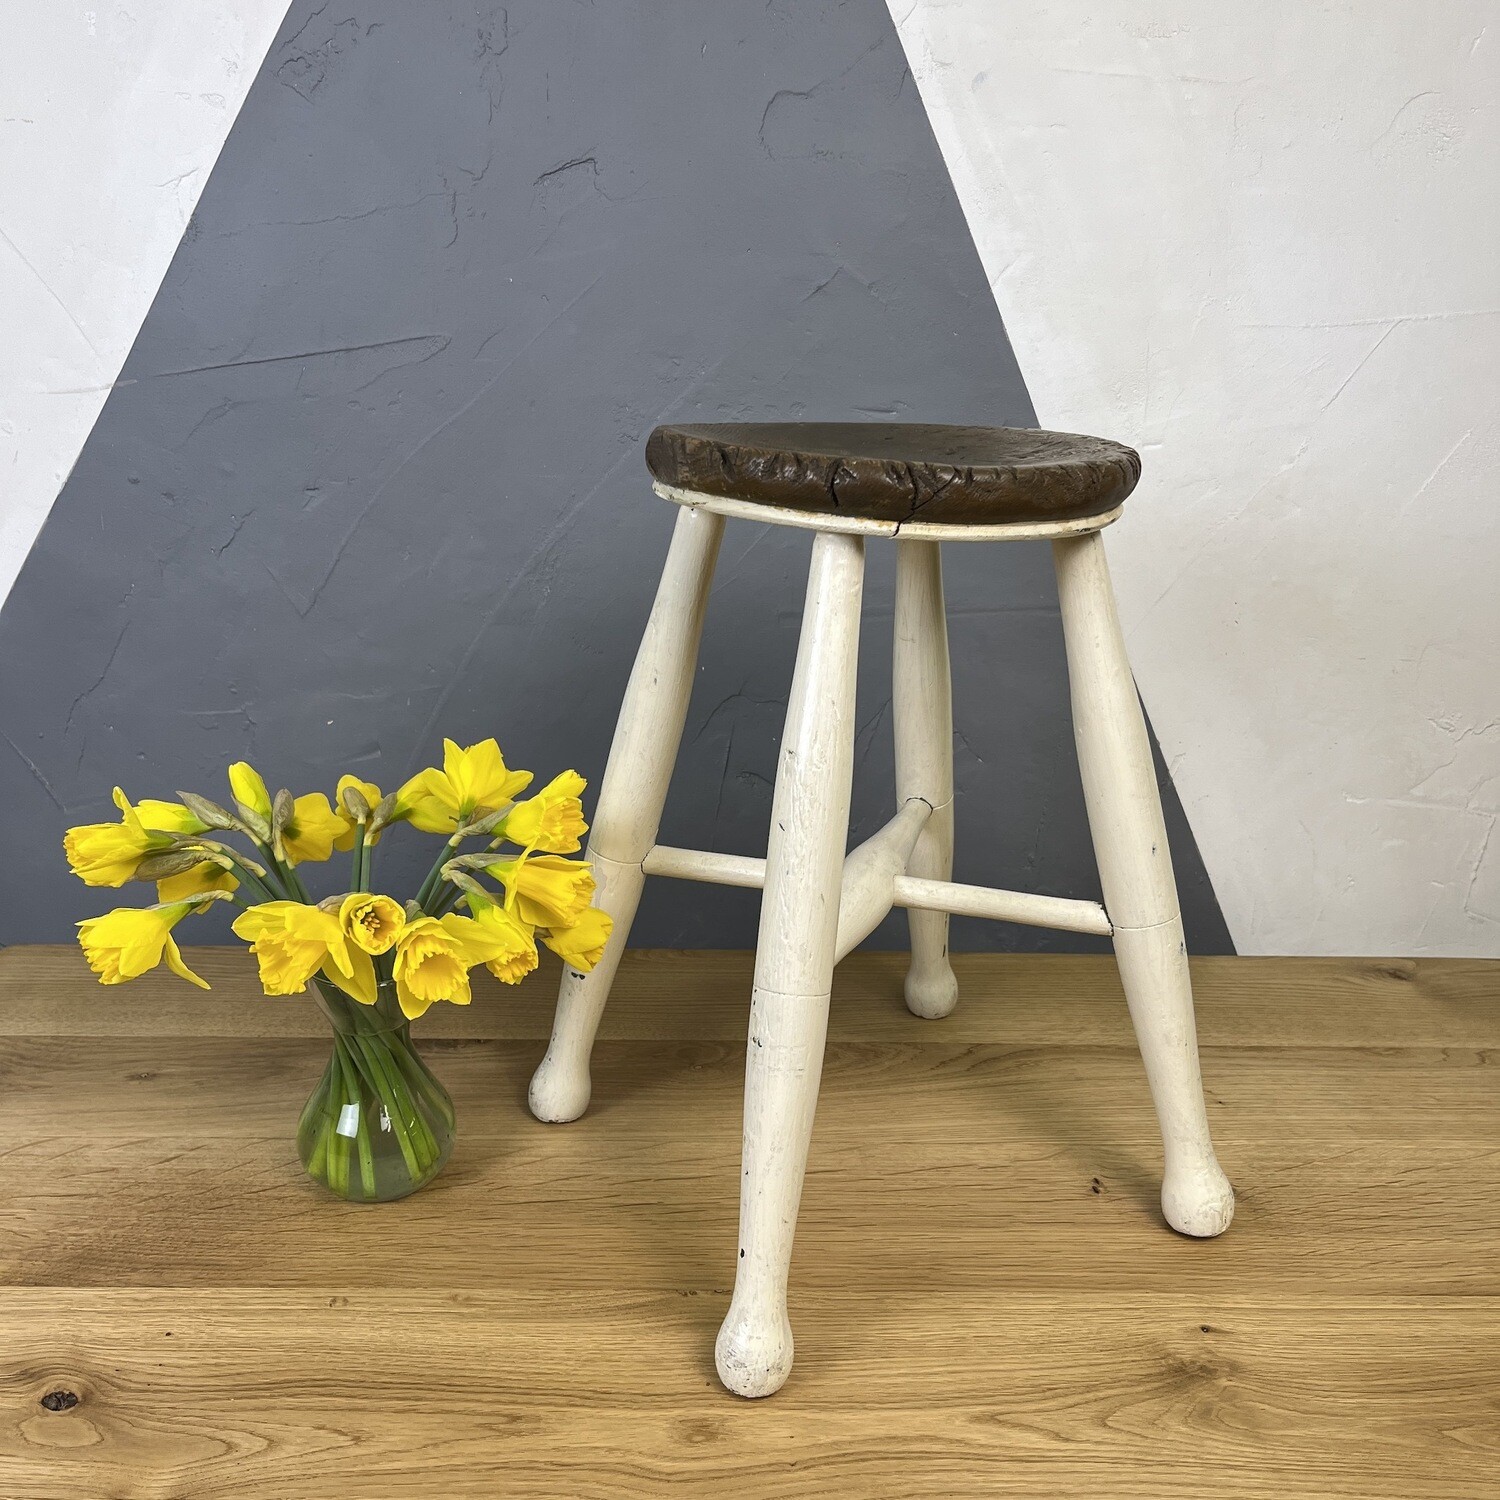 ​Vintage Victorian Farmhouse Stool Rustic Seat Bedside Plant Stand